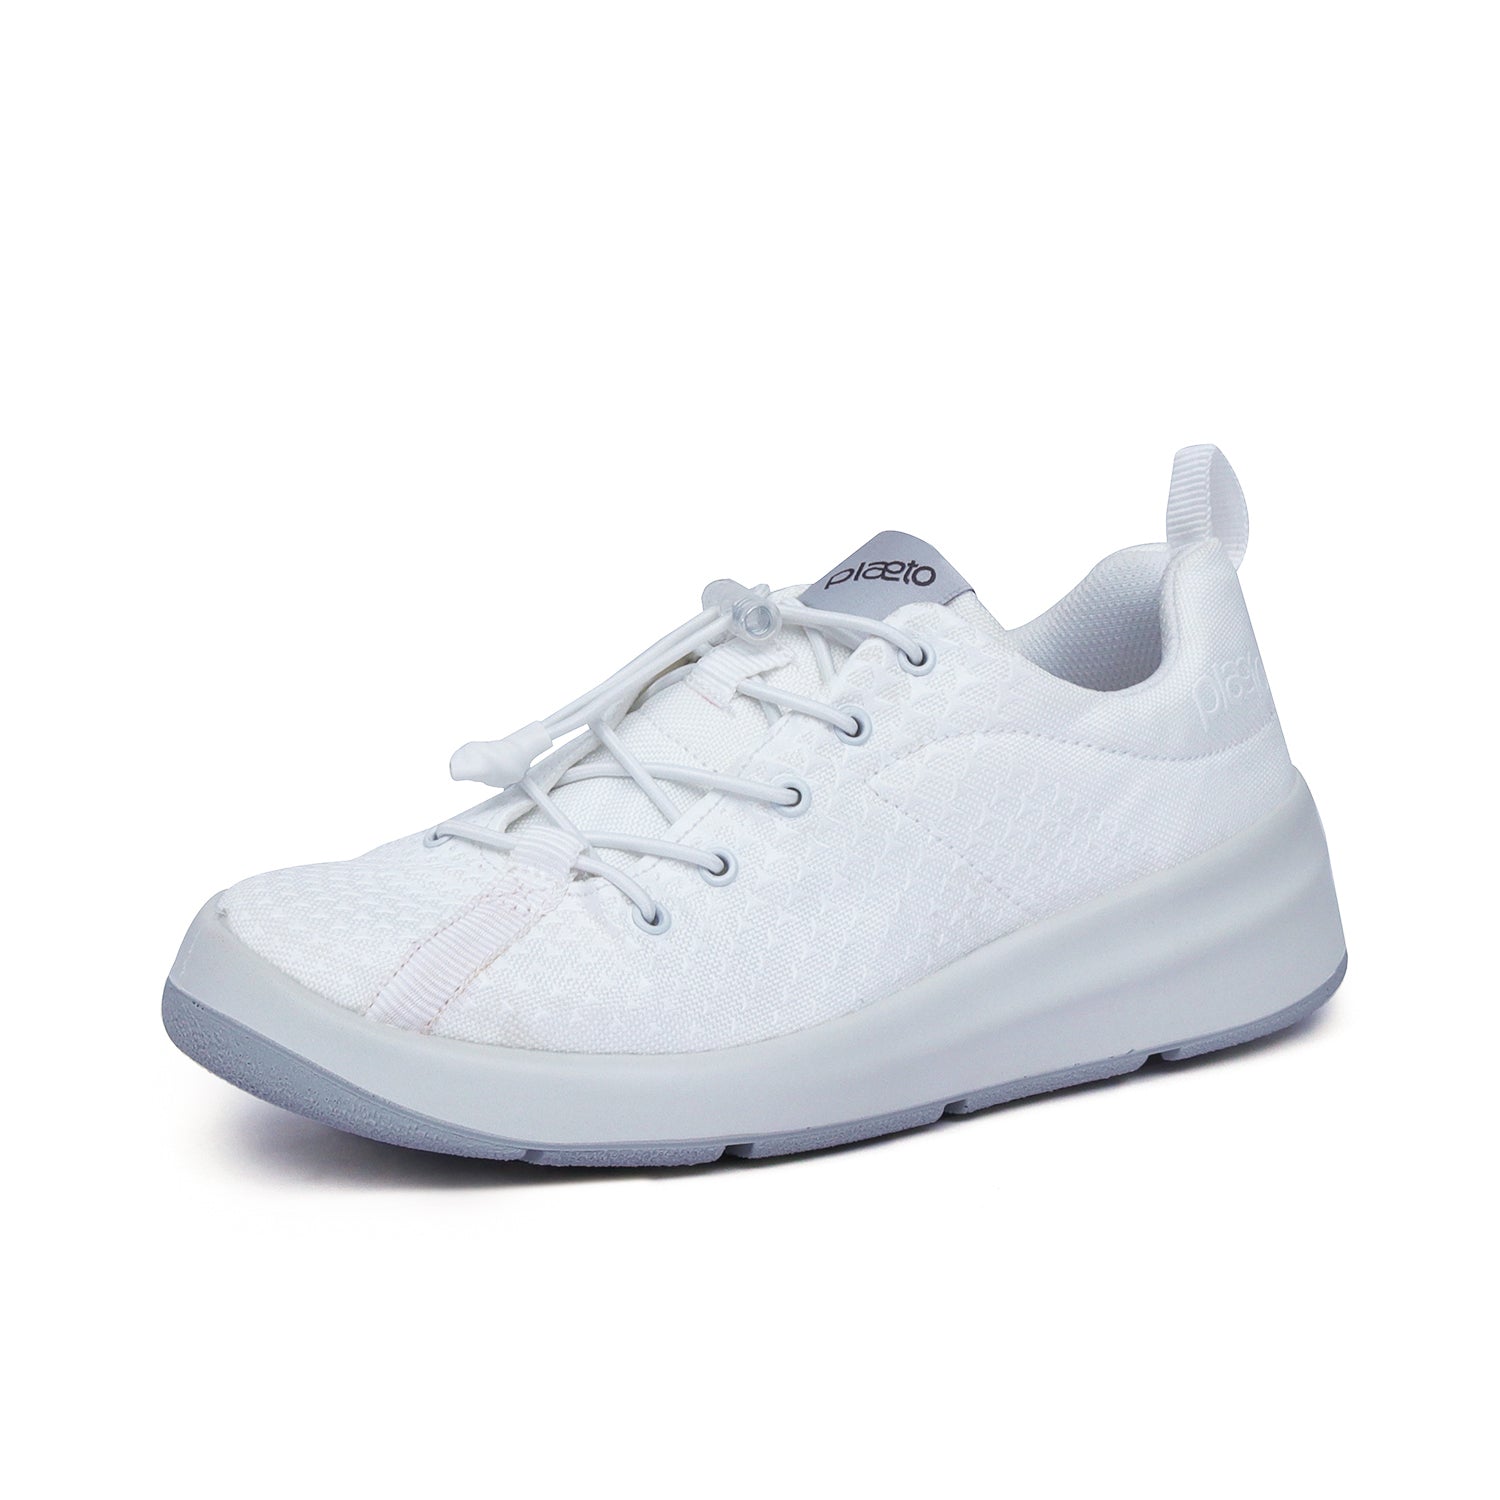 Multiplay Kids Sports Shoes - White